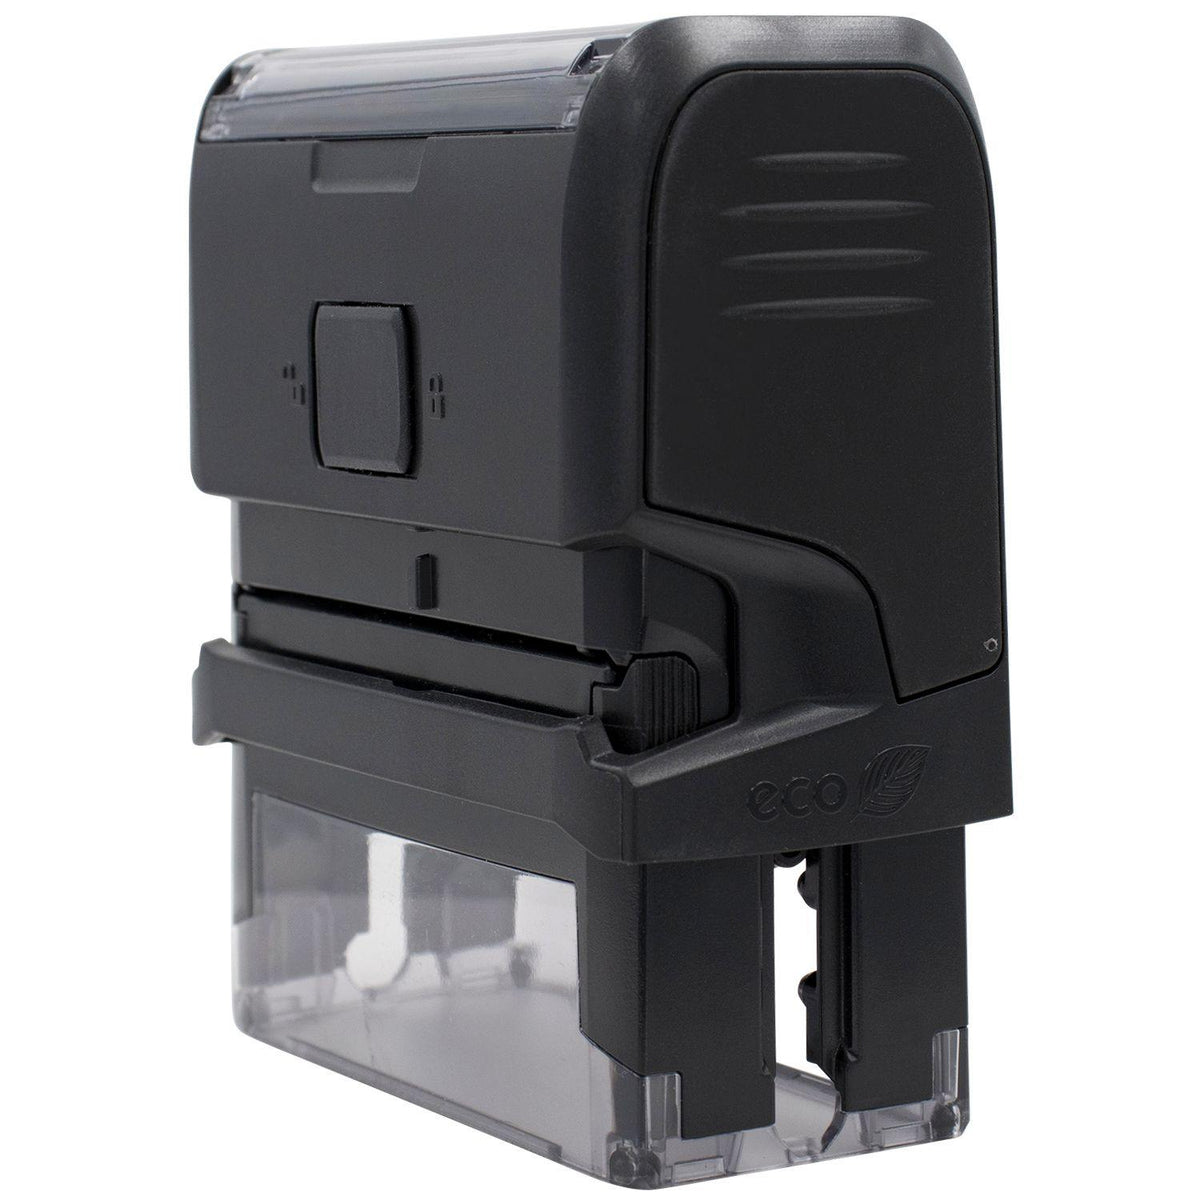 Self Inking Bank Forgery Stamp - Engineer Seal Stamps - Brand_Trodat, Impression Size_Small, Stamp Type_Self-Inking Stamp, Type of Use_Teacher